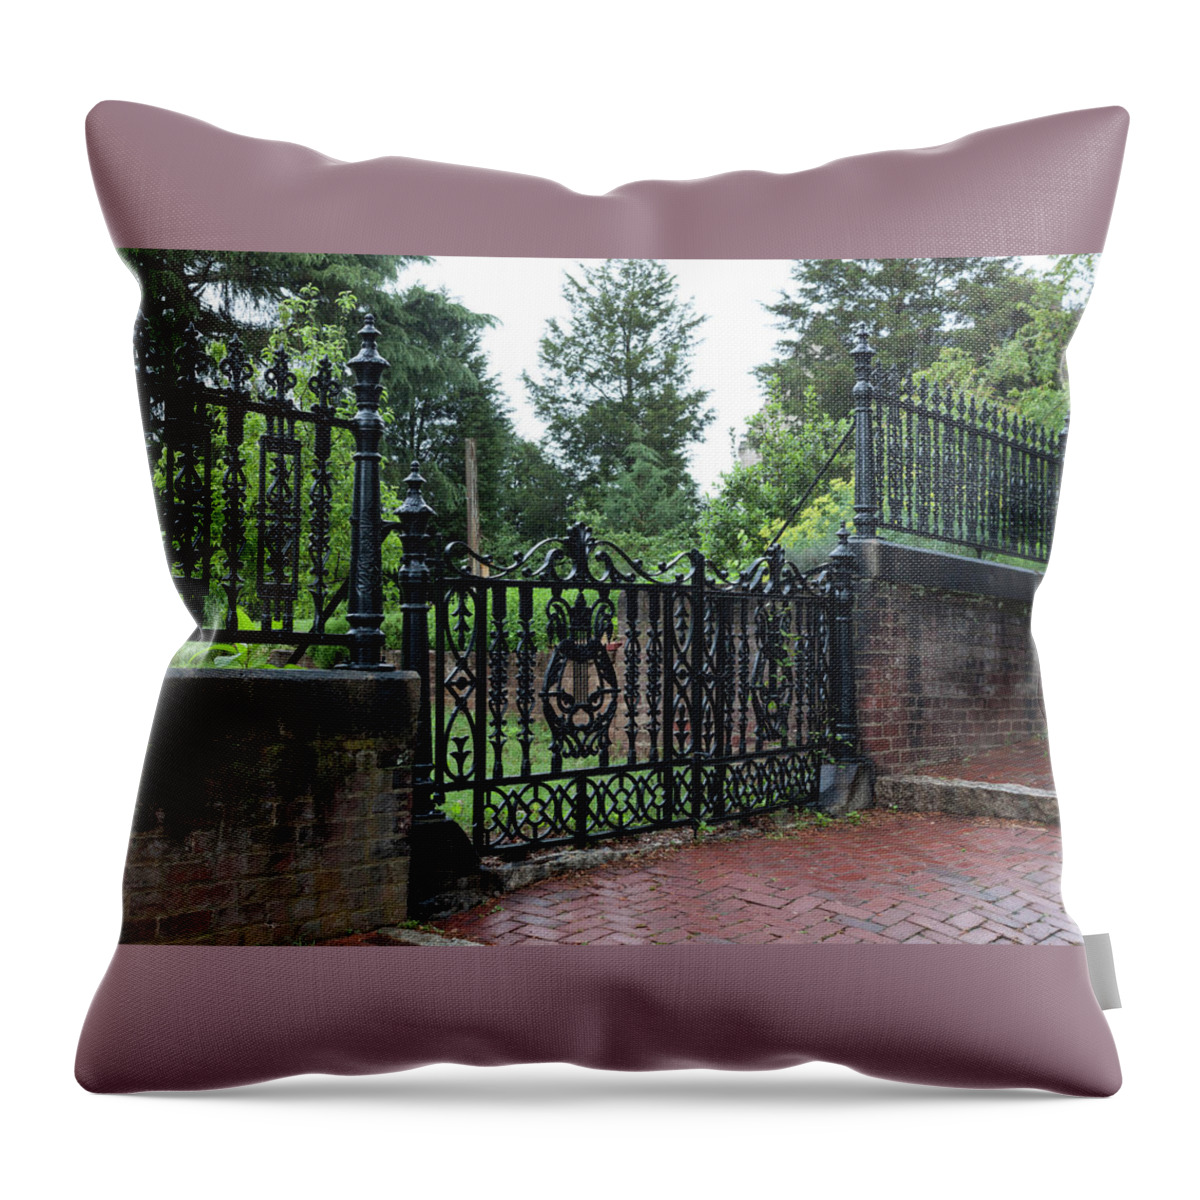 Photograph Throw Pillow featuring the photograph Old Salem Ironwork - Winston Salem Series by Suzanne Gaff